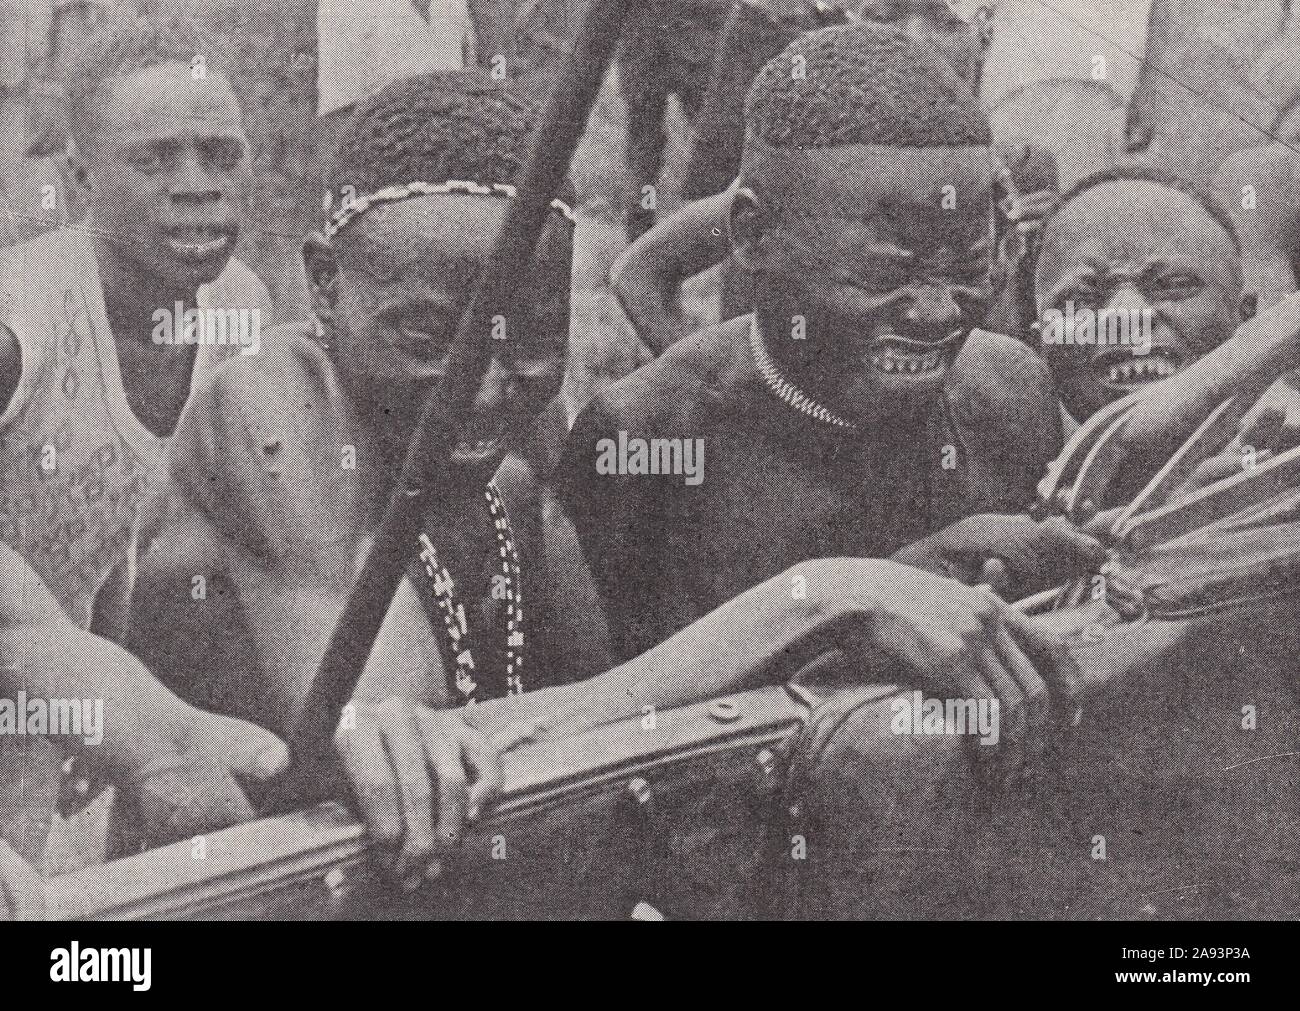 Natives of Central Africa with filed teeth 1930s Stock Photo - Alamy